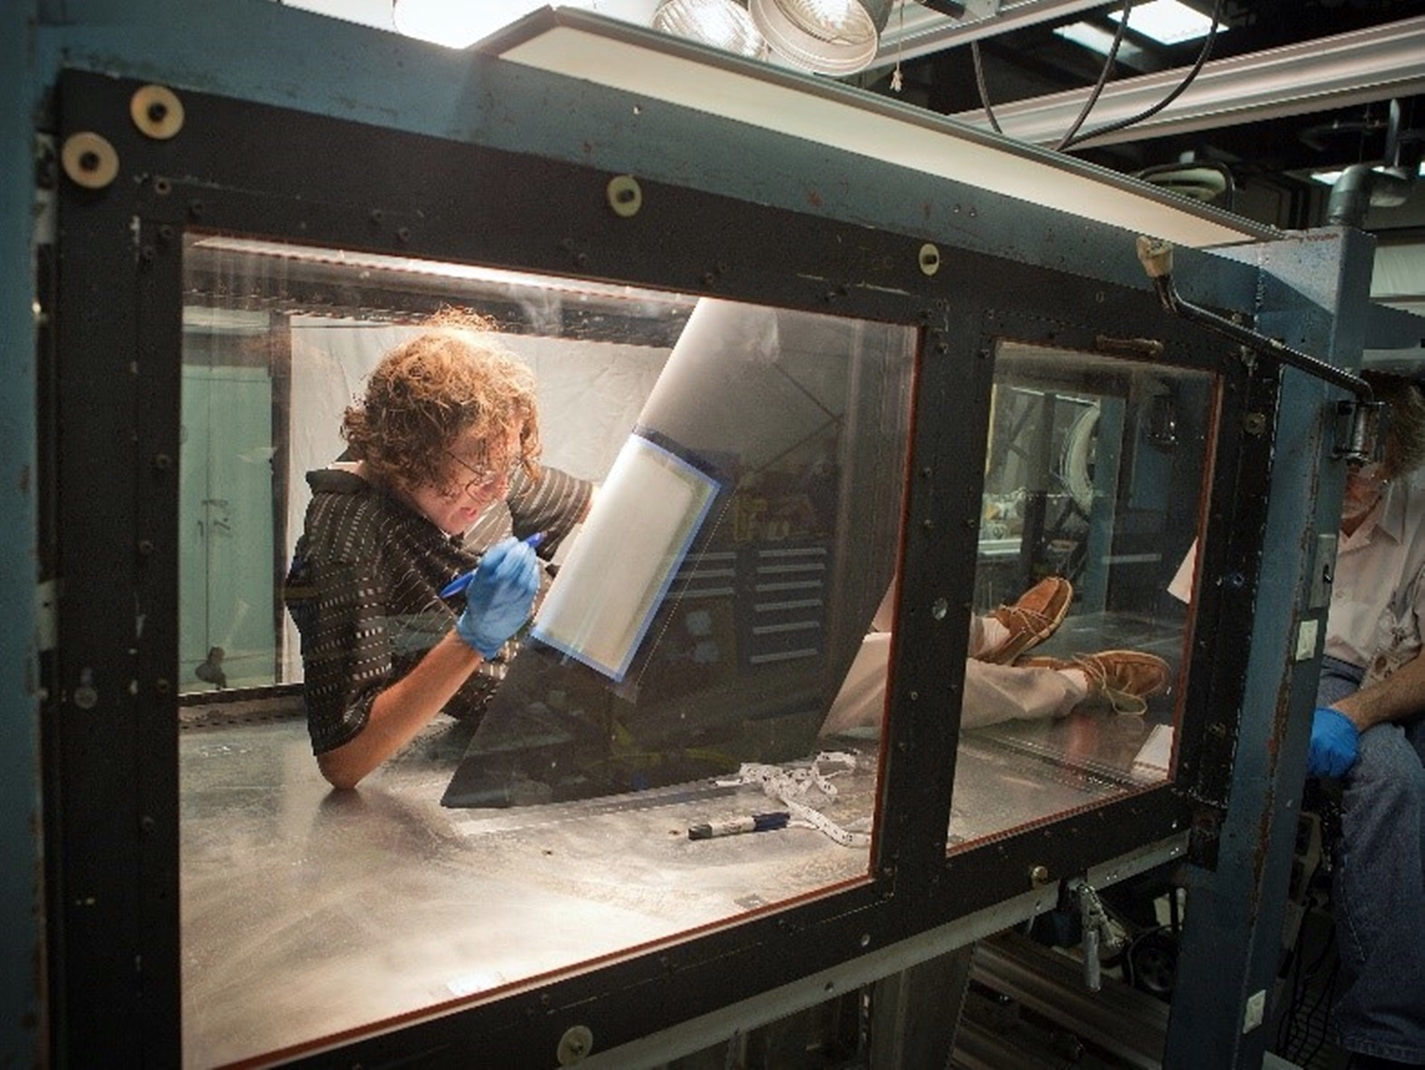 NASA researcher preps model wing for a blast from the "bug gun."